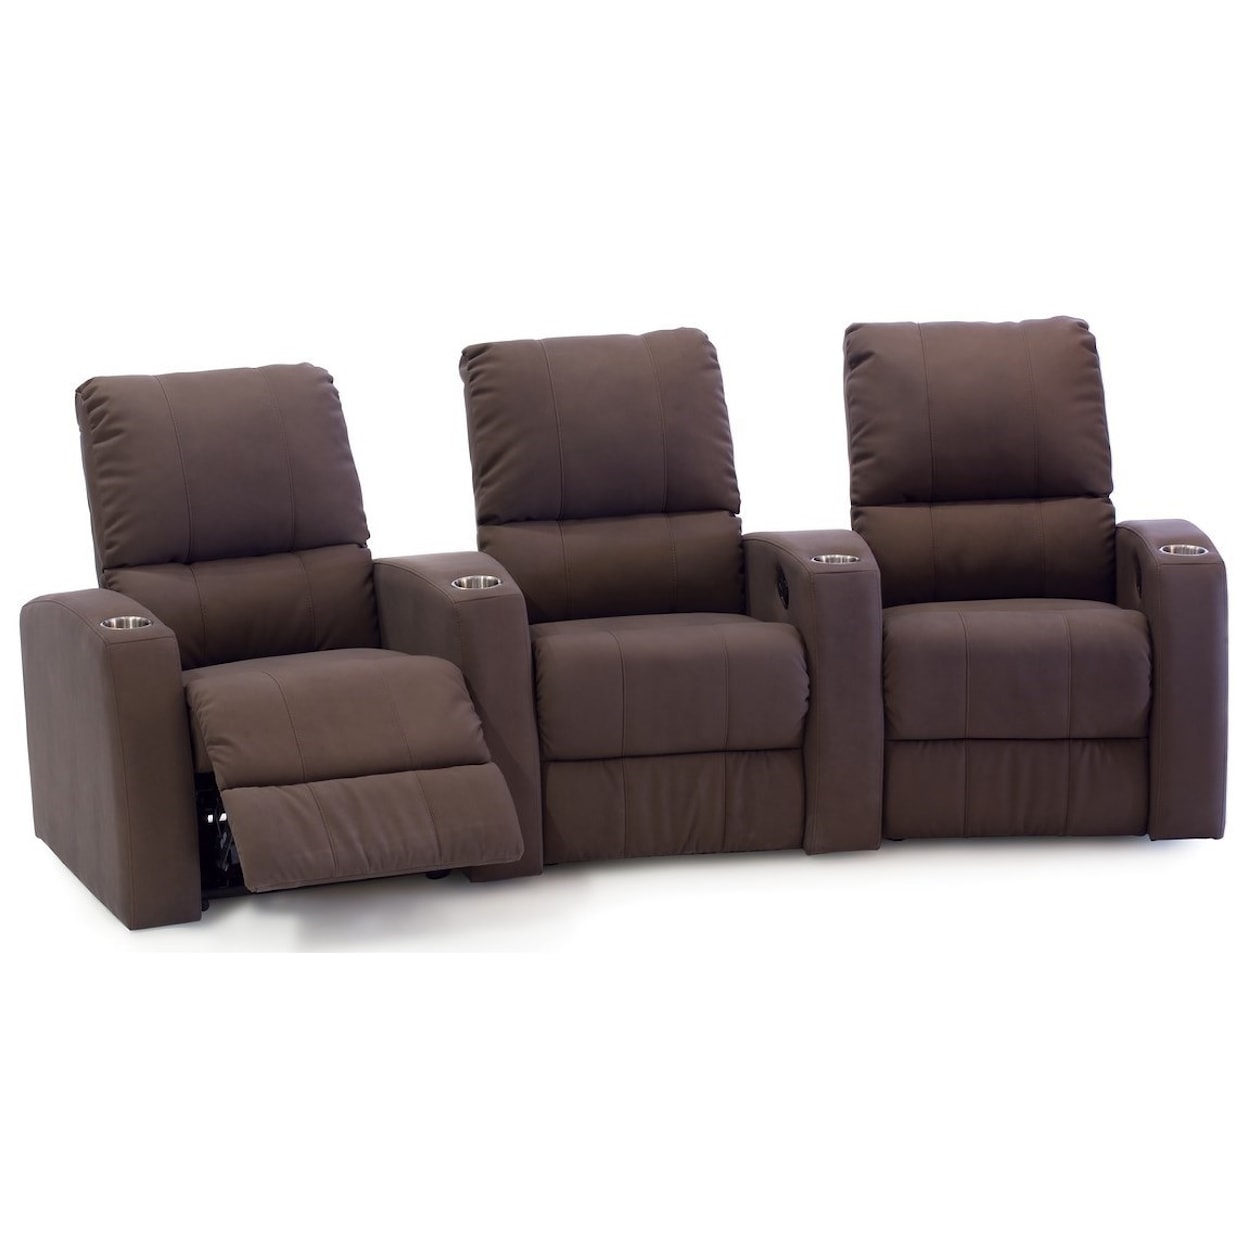 Palliser Pacifico 41920 3-Seat Curved Theater Seating